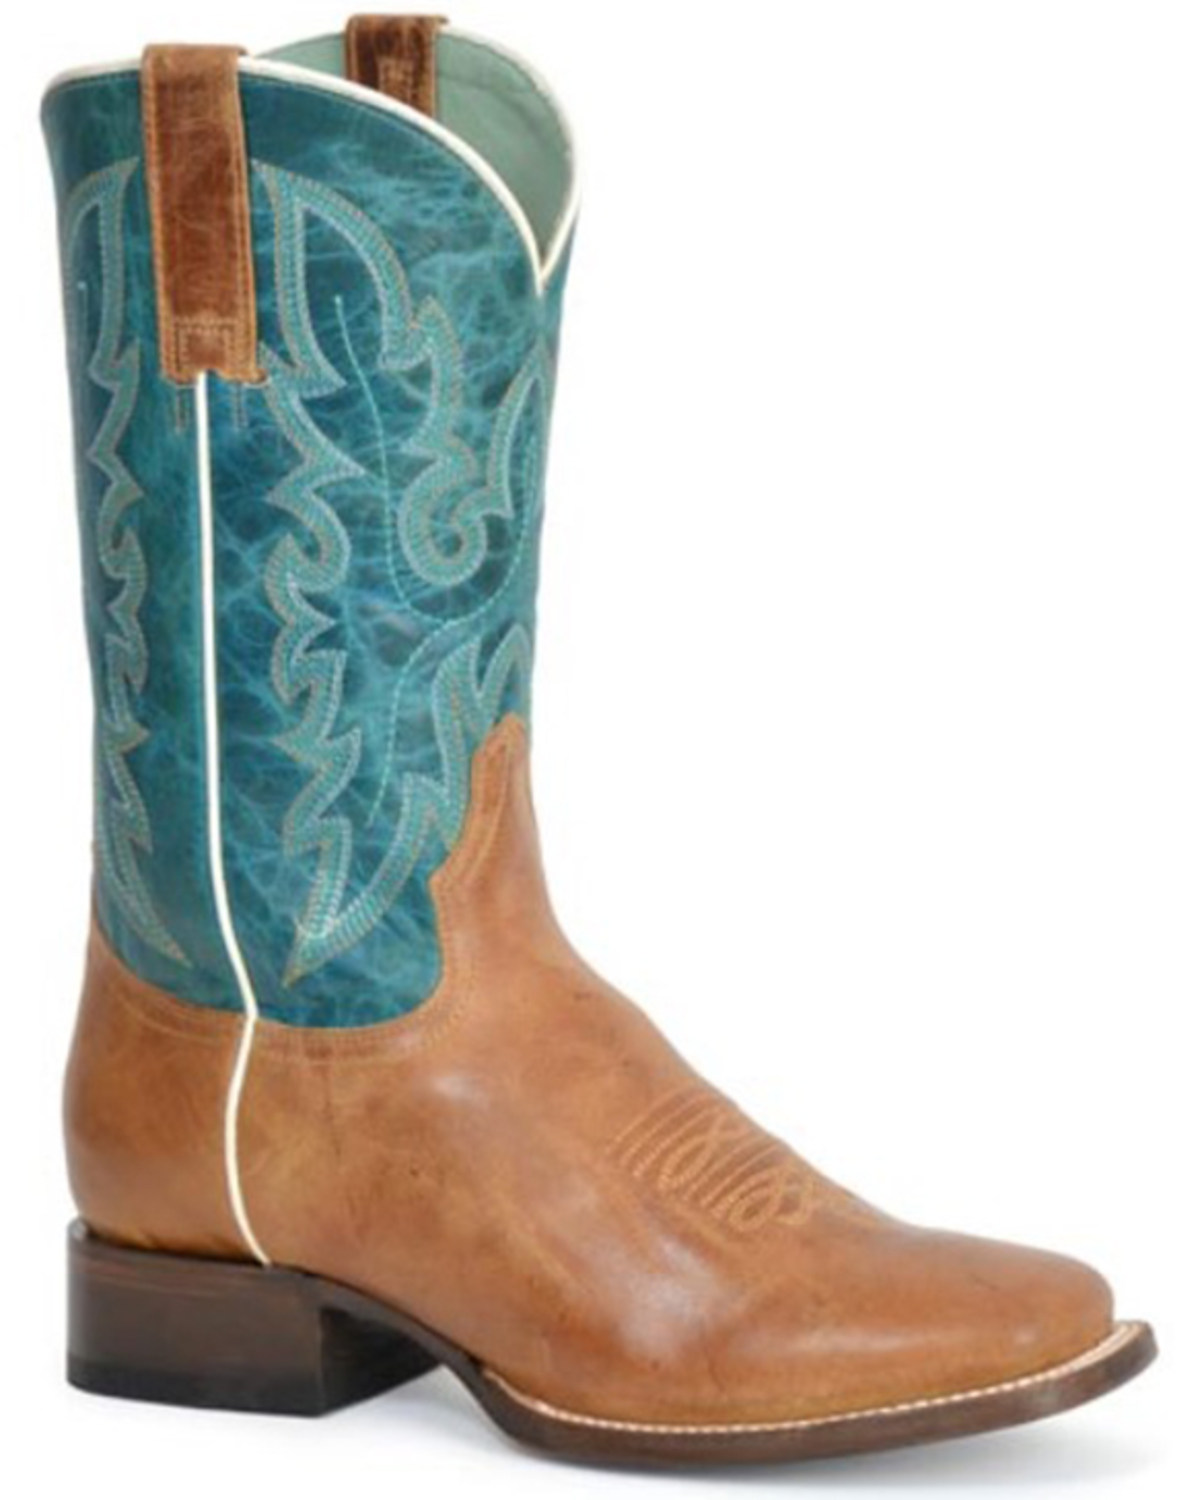 Roper Women's Maeve Western Boots - Broad Square Toe